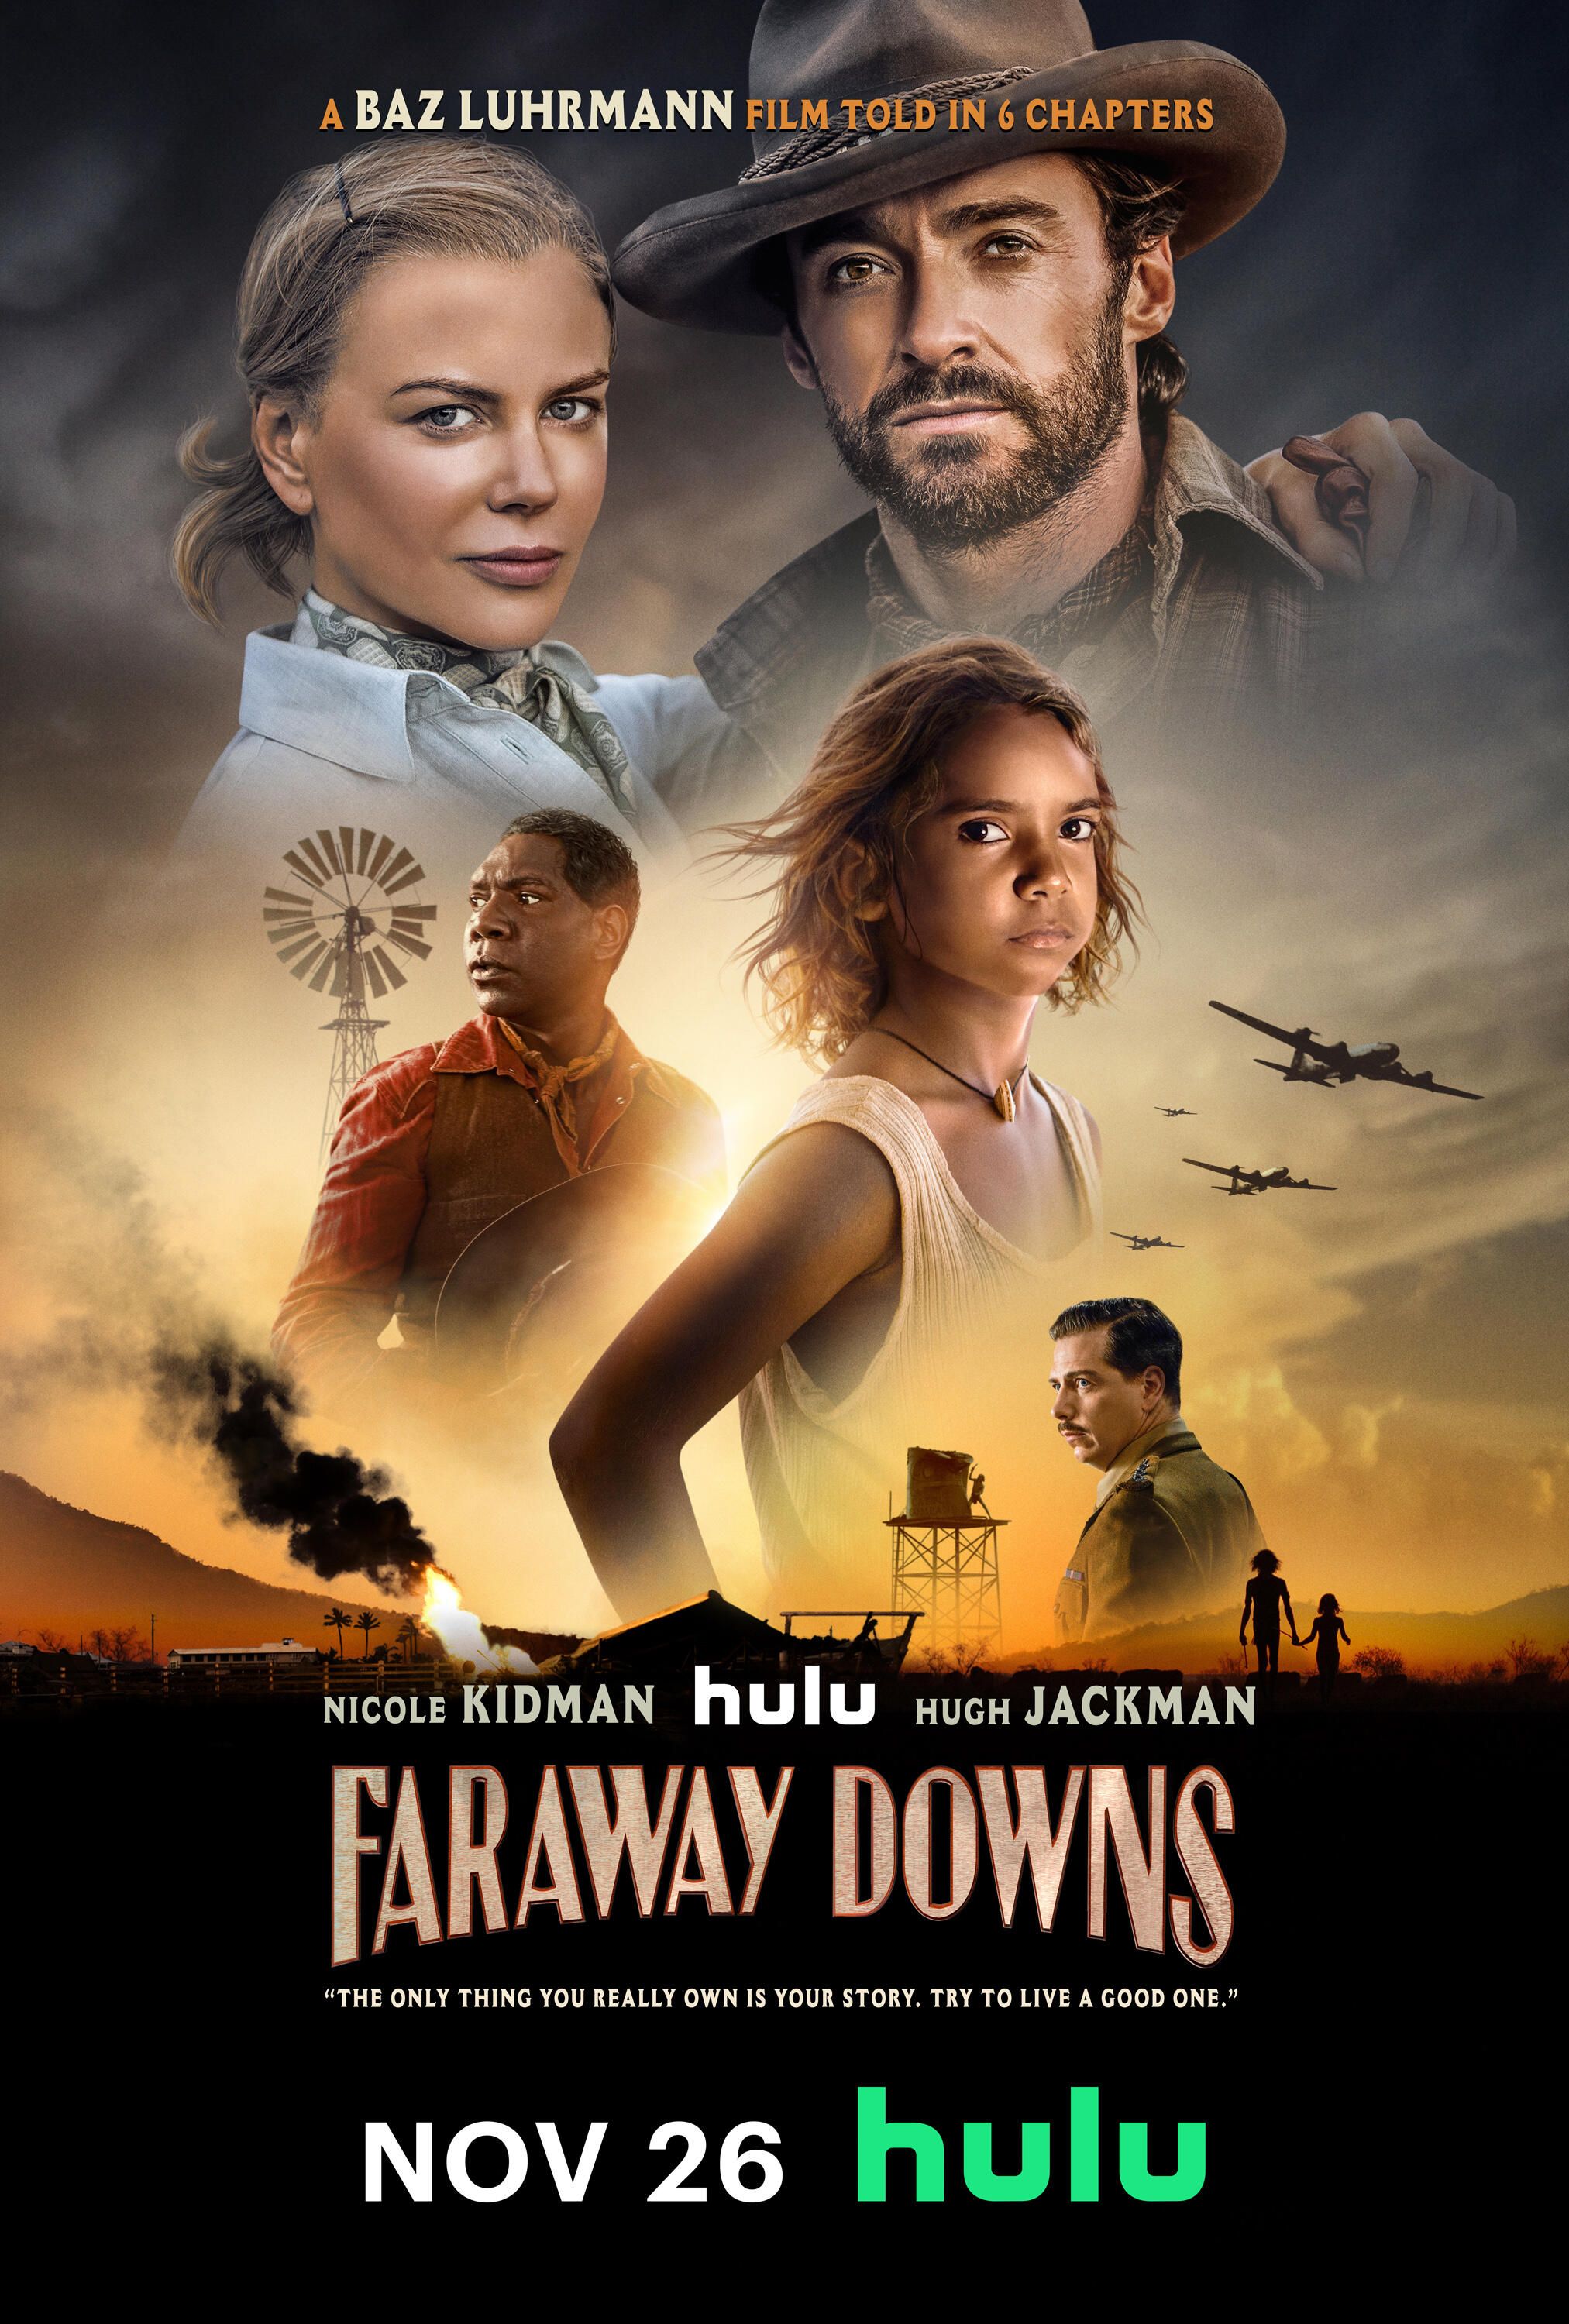 'Faraway Downs' Everything We Know About the 'Australia' Extended Cut